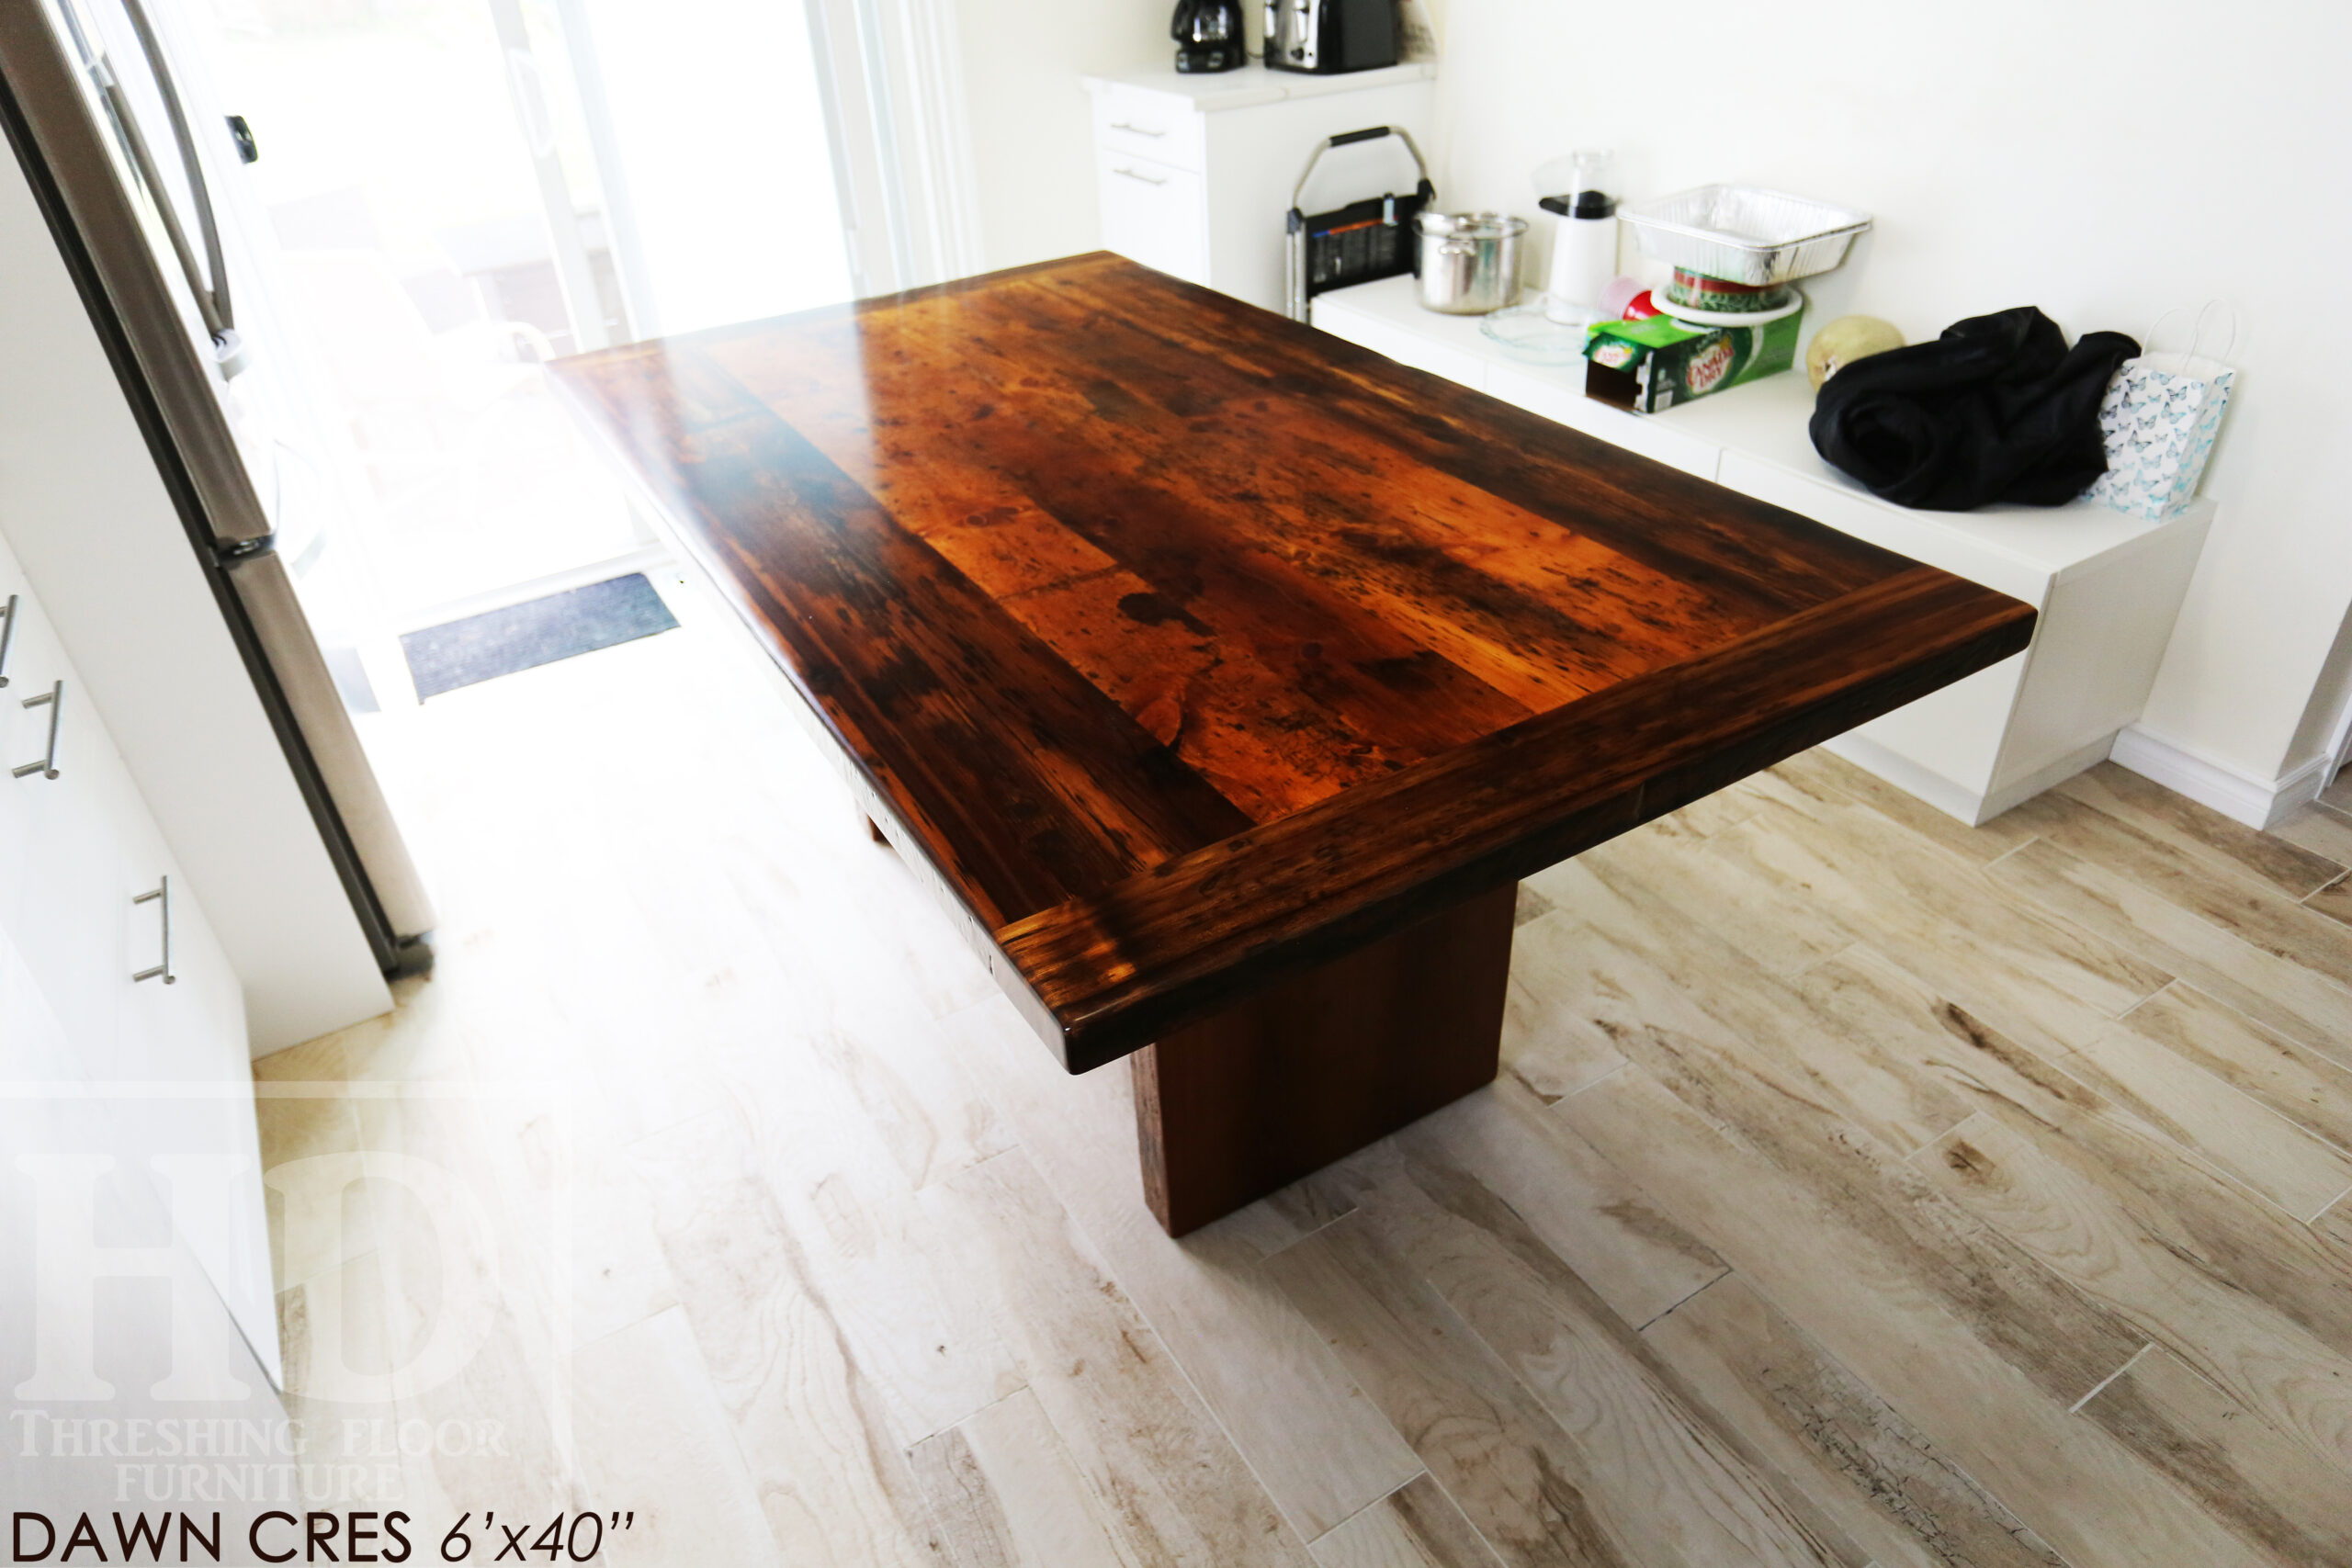 6' Ontario Barnwood Table for a Cambridge, Ontario Home - 40" wide - Modern Plank Base - Reclaimed Old Growth Hemlock Threshing Floor Construction - Original Distressing & Character & Edges Maintained - Premium epoxy + satin polyurethane finish - Two 18" Leaf Extensions [making total length 9' when extended] - www.table.ca